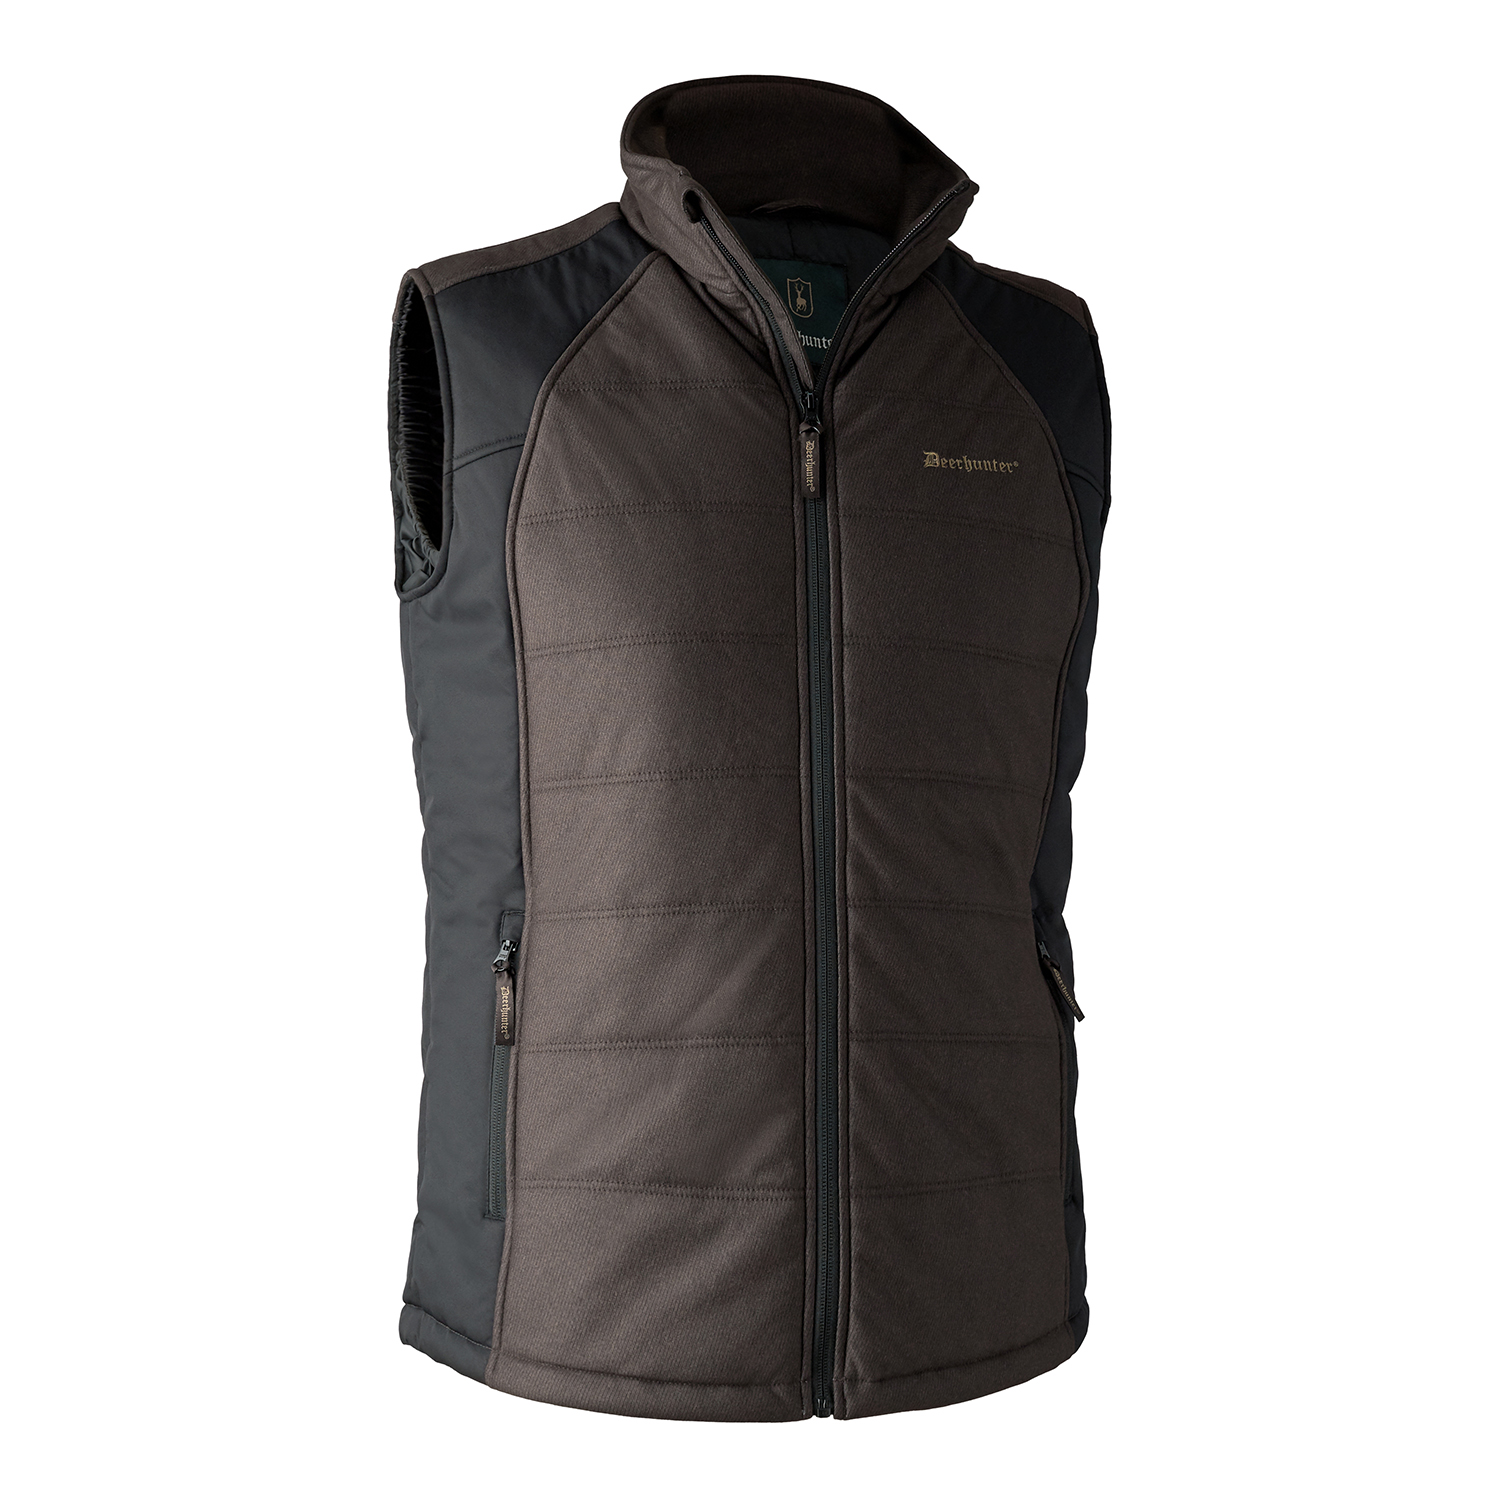 Moss Padded Vest - Brown Leaf - S thumbnail